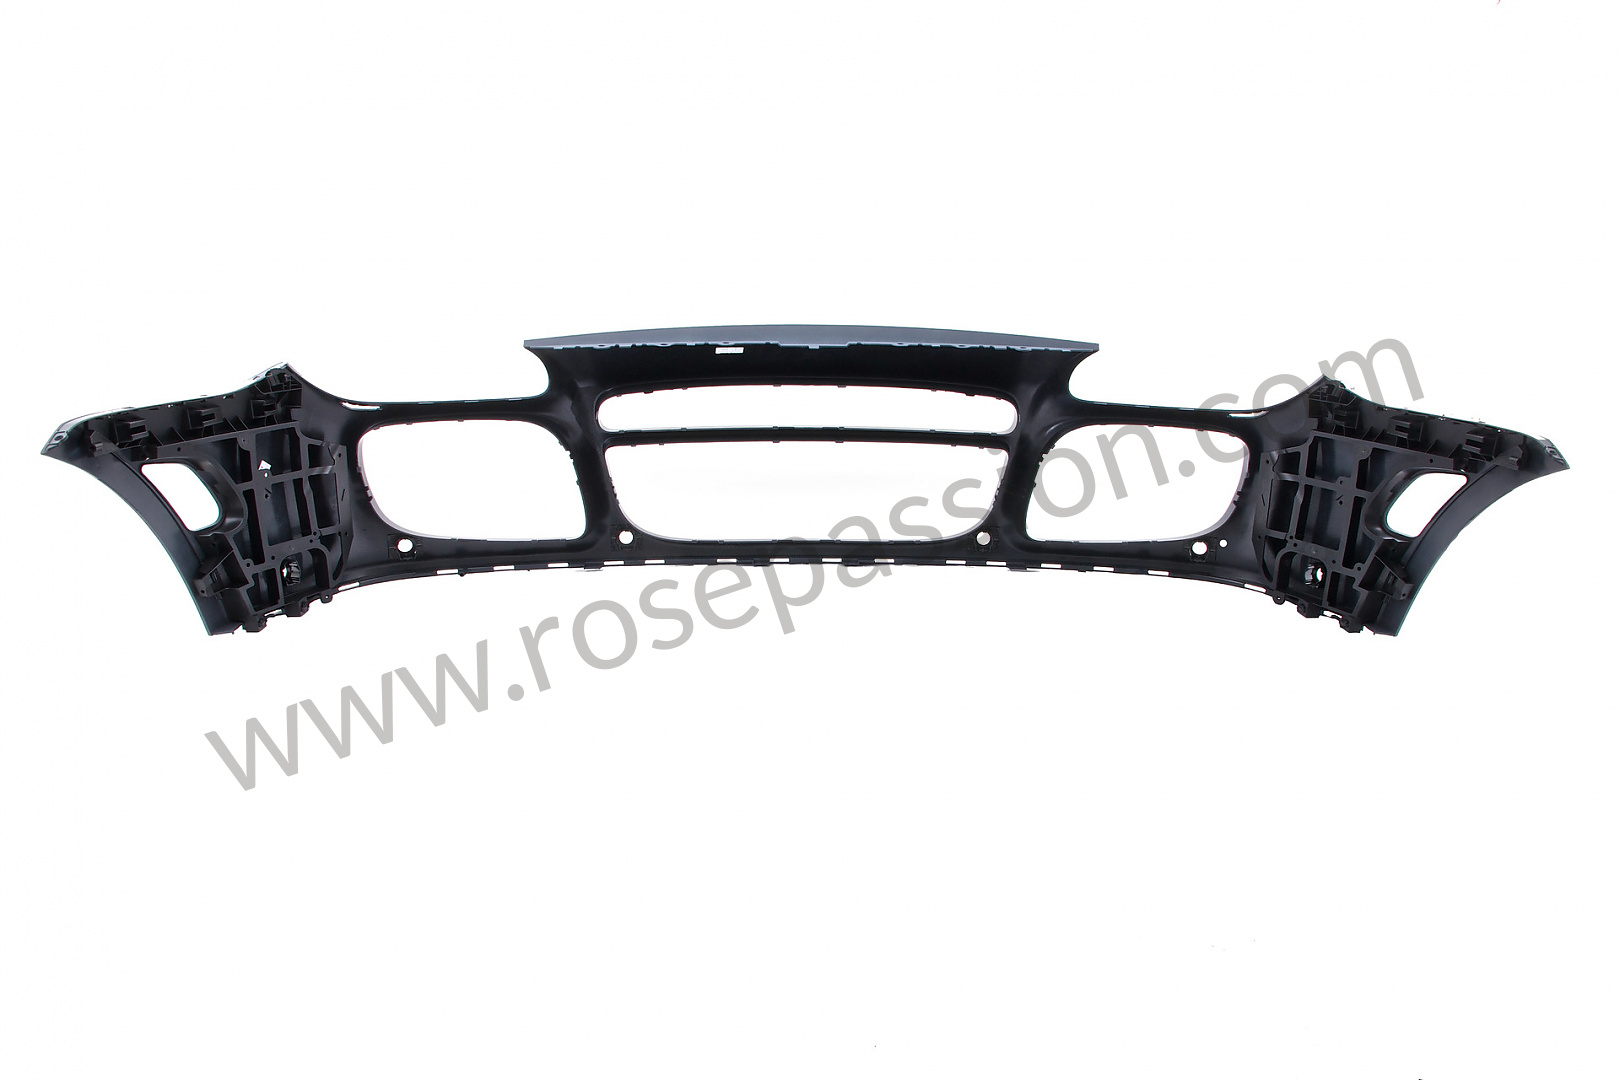 P74510 95550531104g2x Lining 95550531105g2x For Porsche Cayenne 955 9pa 2005 Cayenne Turbo Automatic Gearbox